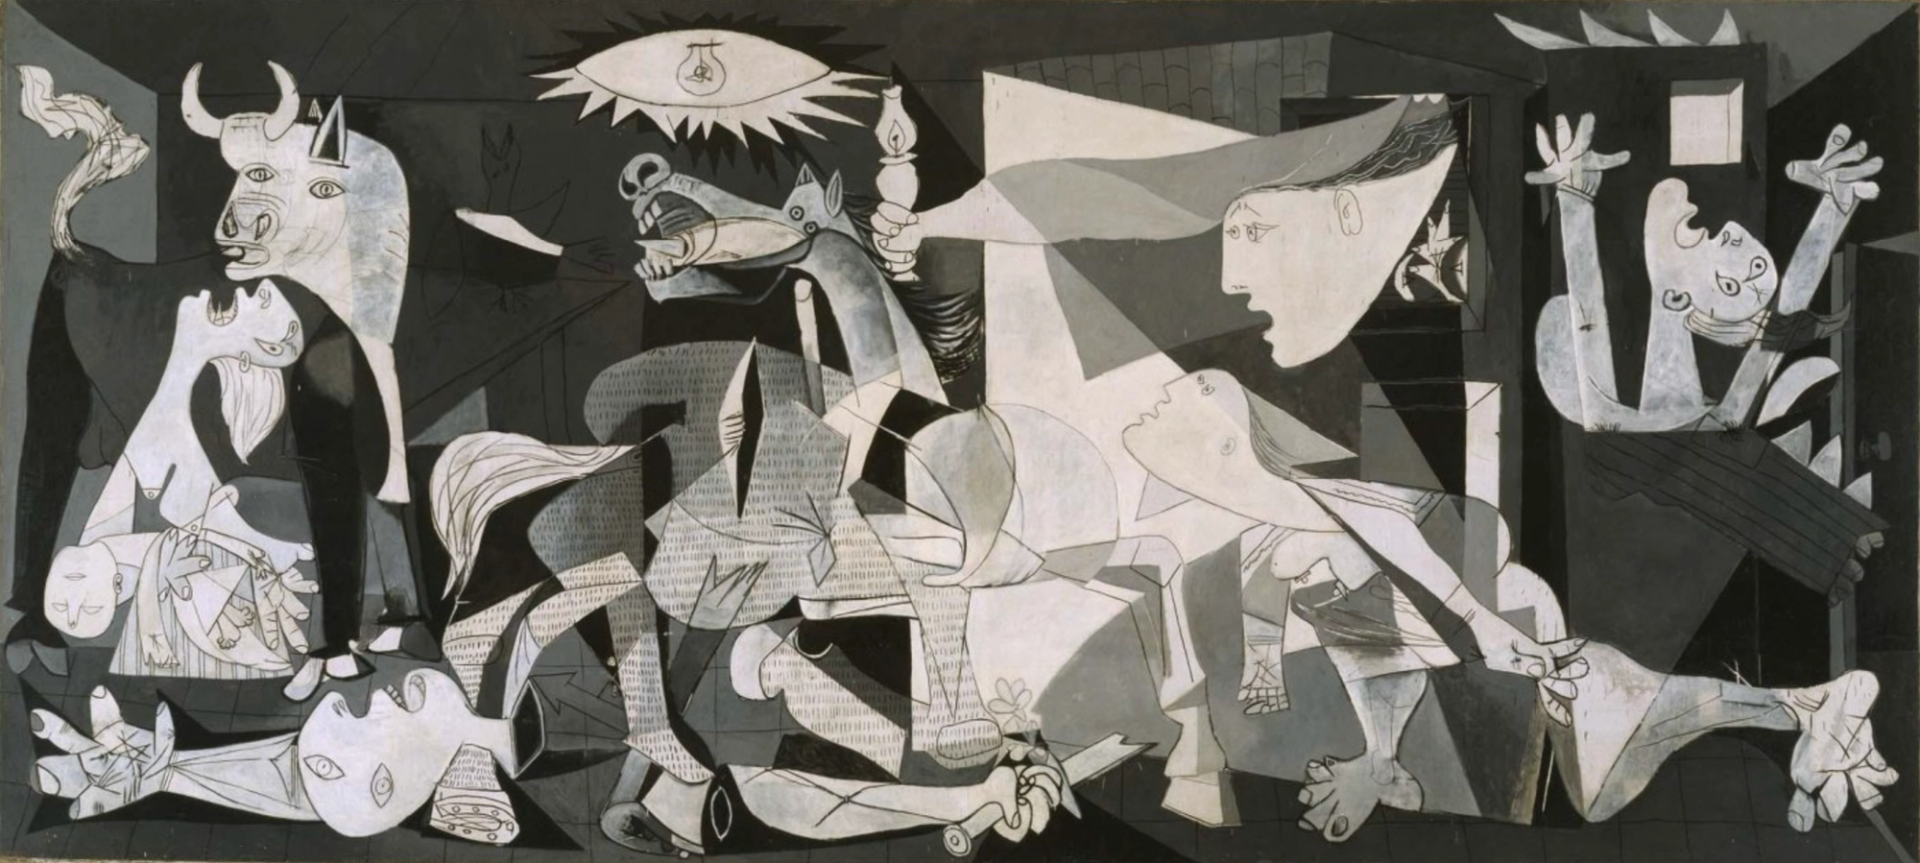 A stark monochrome painting by Picasso, depicting the bombing of Guernica during the Spanish Civil War. Through its portrayal of anguished figures, including a gored horse, a bull, screaming women, and a dismembered soldier, the painting conveys the chaos and suffering caused by violence.